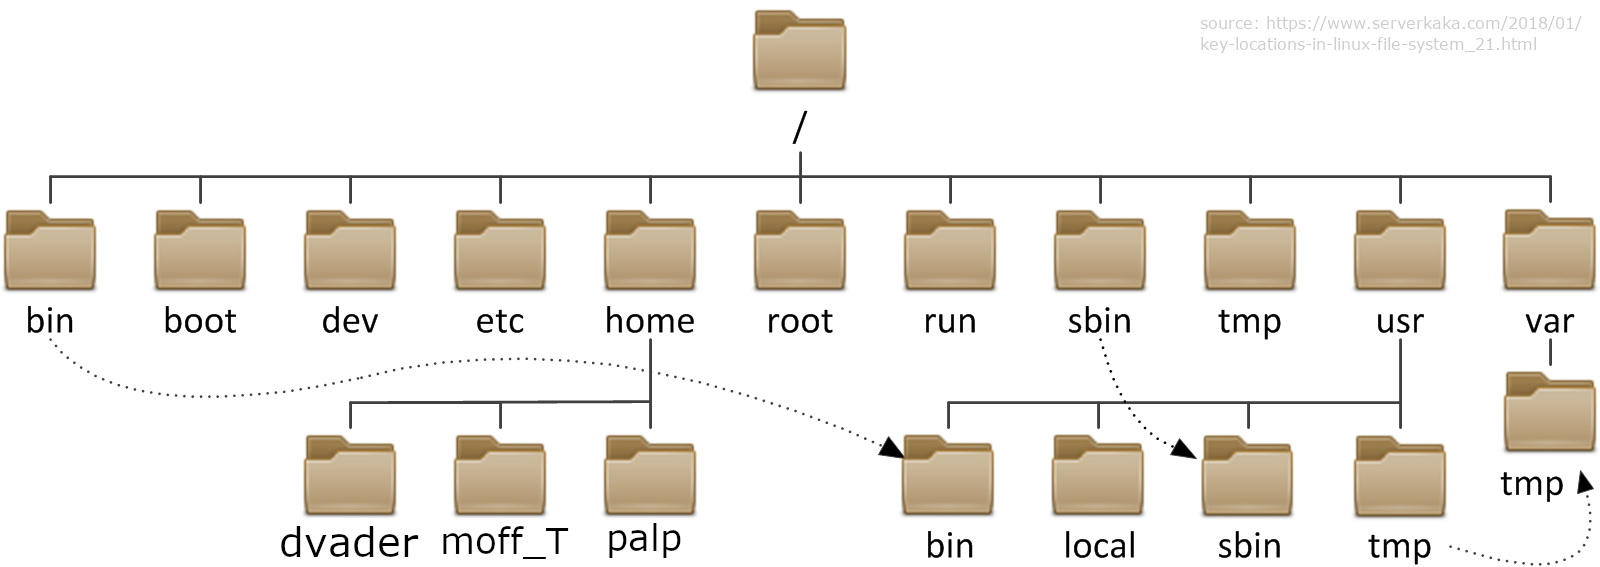 Linux file system (modified from from https://www.serverkaka.com/2018/01/key-locations-in-linux-file-system_21.html)